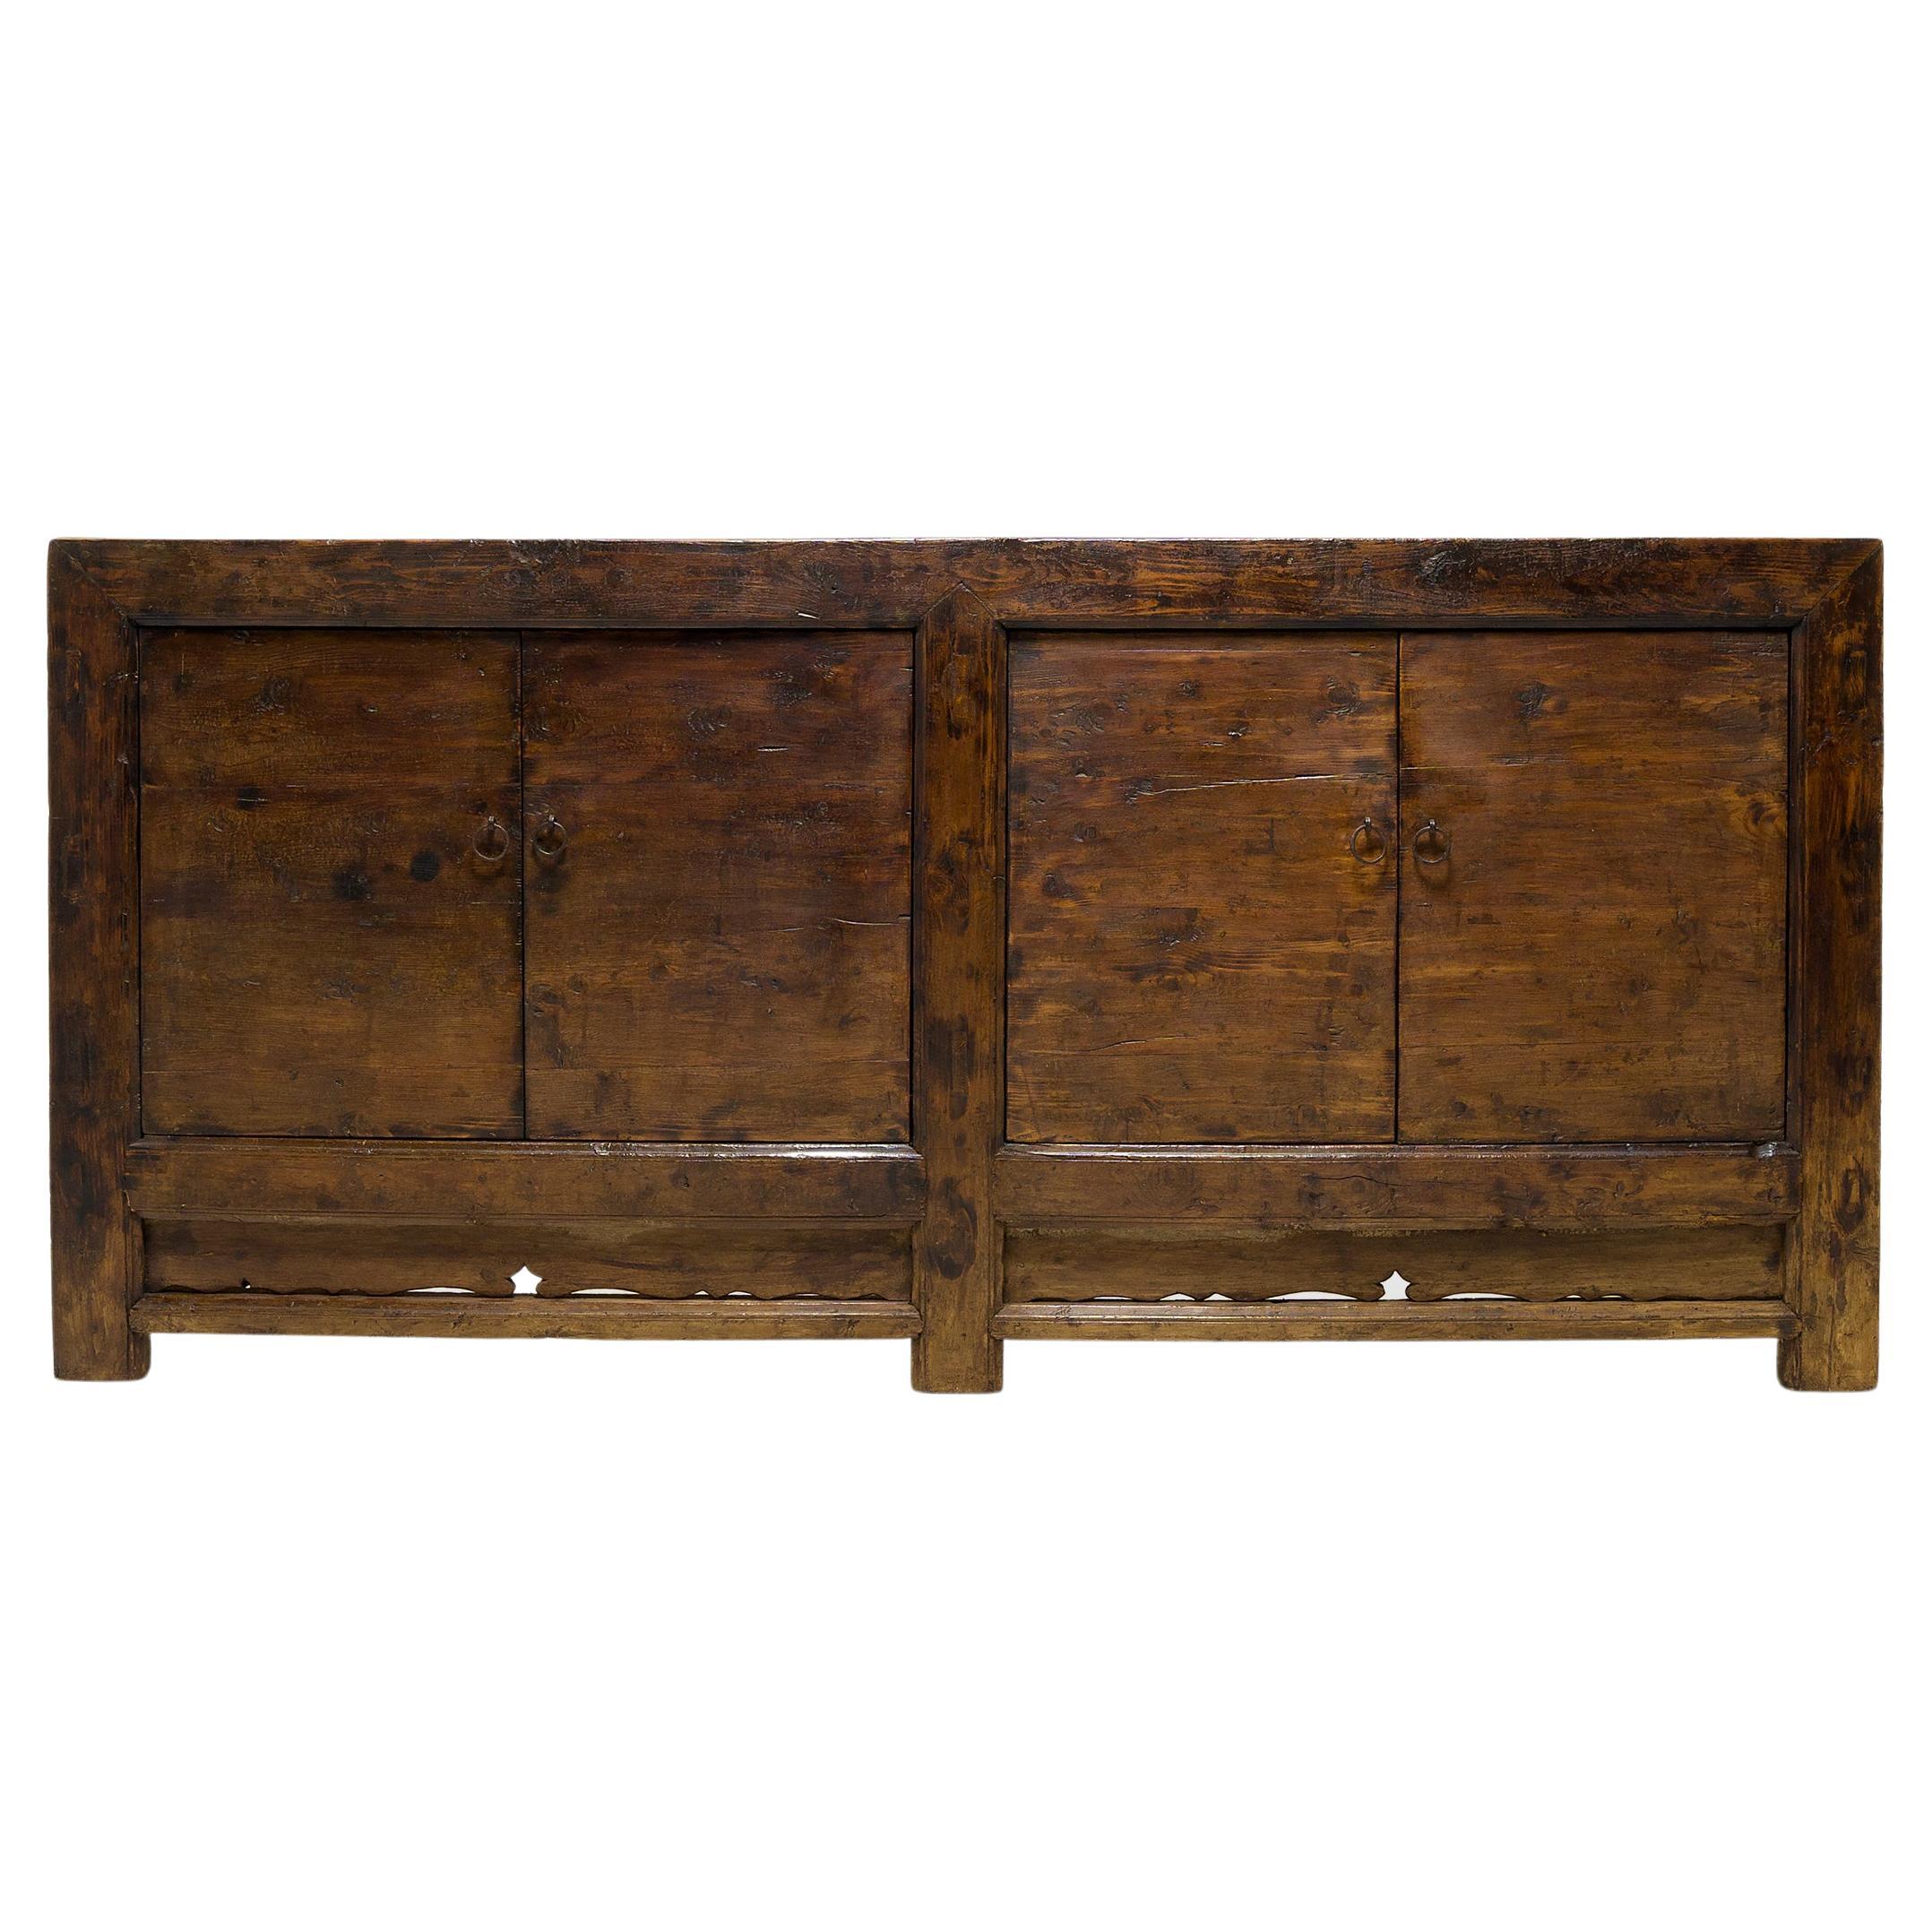 Chinese Great Plains Coffer, c. 1880